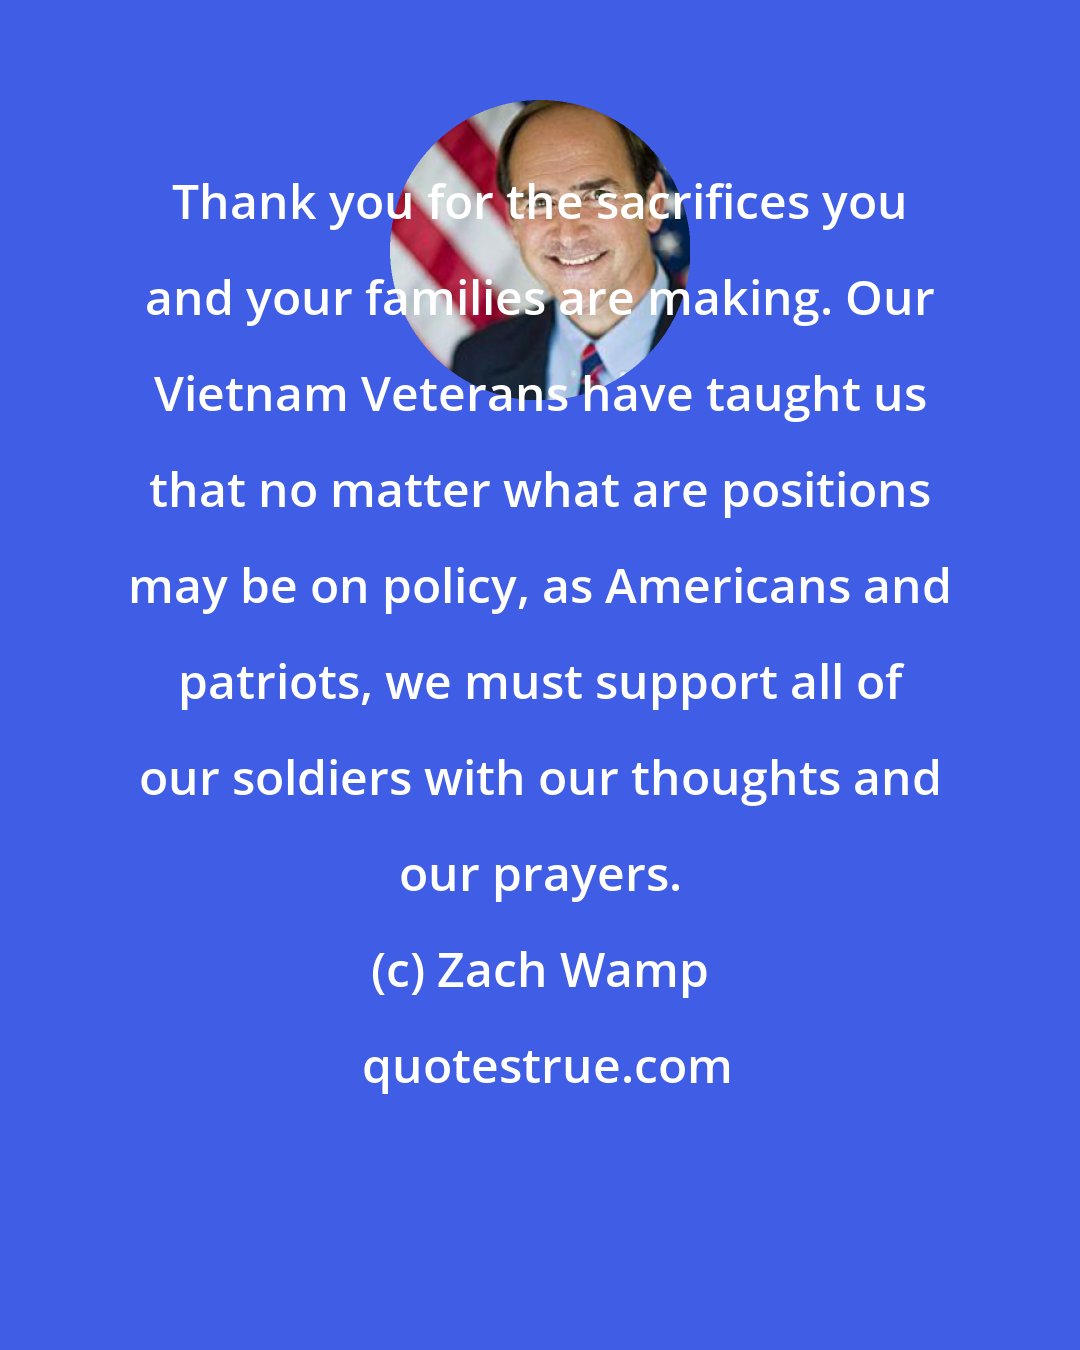 Zach Wamp: Thank you for the sacrifices you and your families are making. Our Vietnam Veterans have taught us that no matter what are positions may be on policy, as Americans and patriots, we must support all of our soldiers with our thoughts and our prayers.